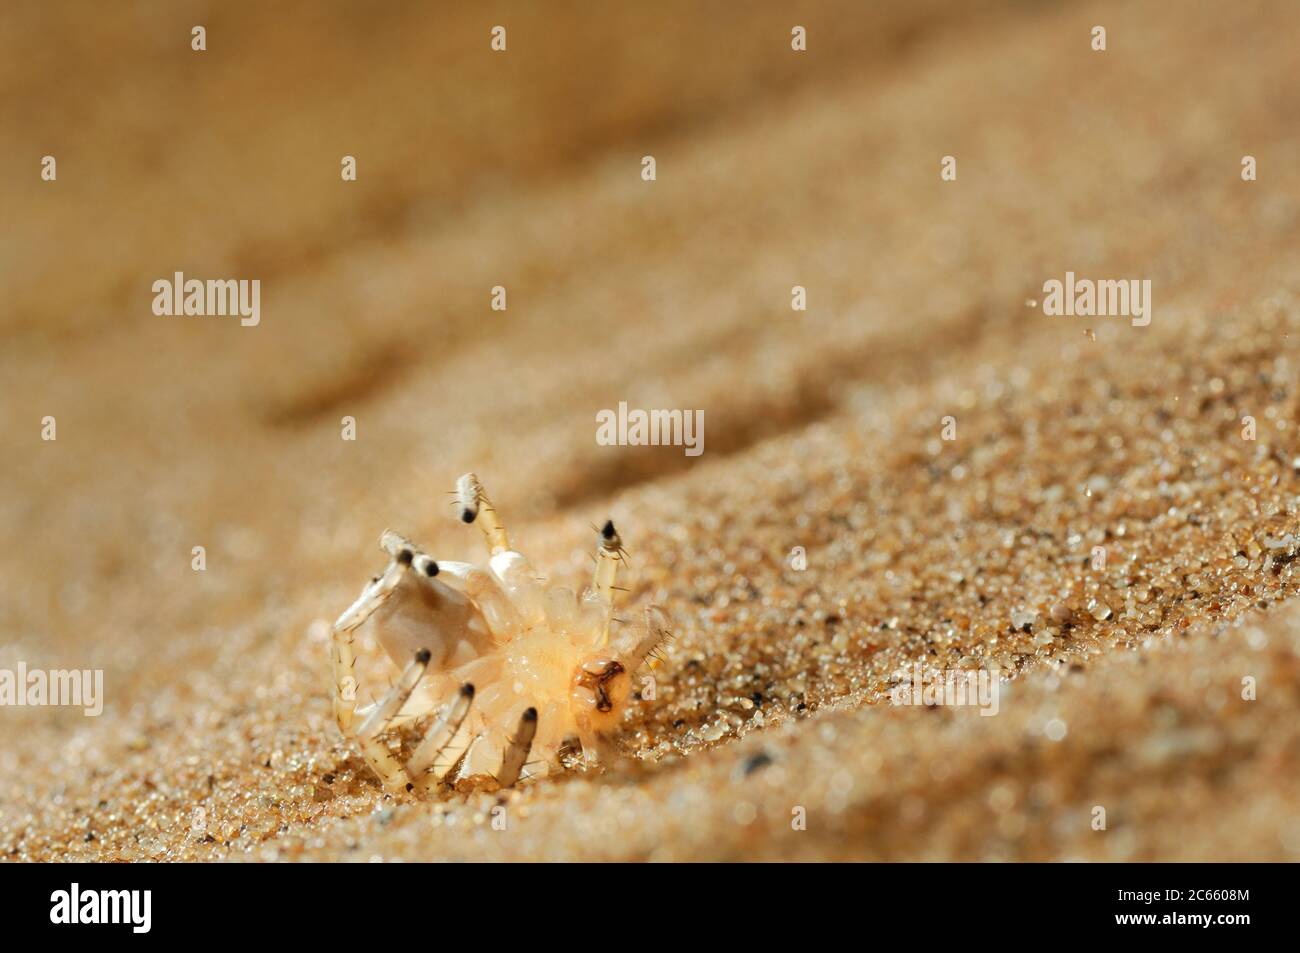 The Golden Wheel Spider (Carparachne aureoflava) is truly a unique and amazing creature of the beautiful Namib Desert. Stock Photo